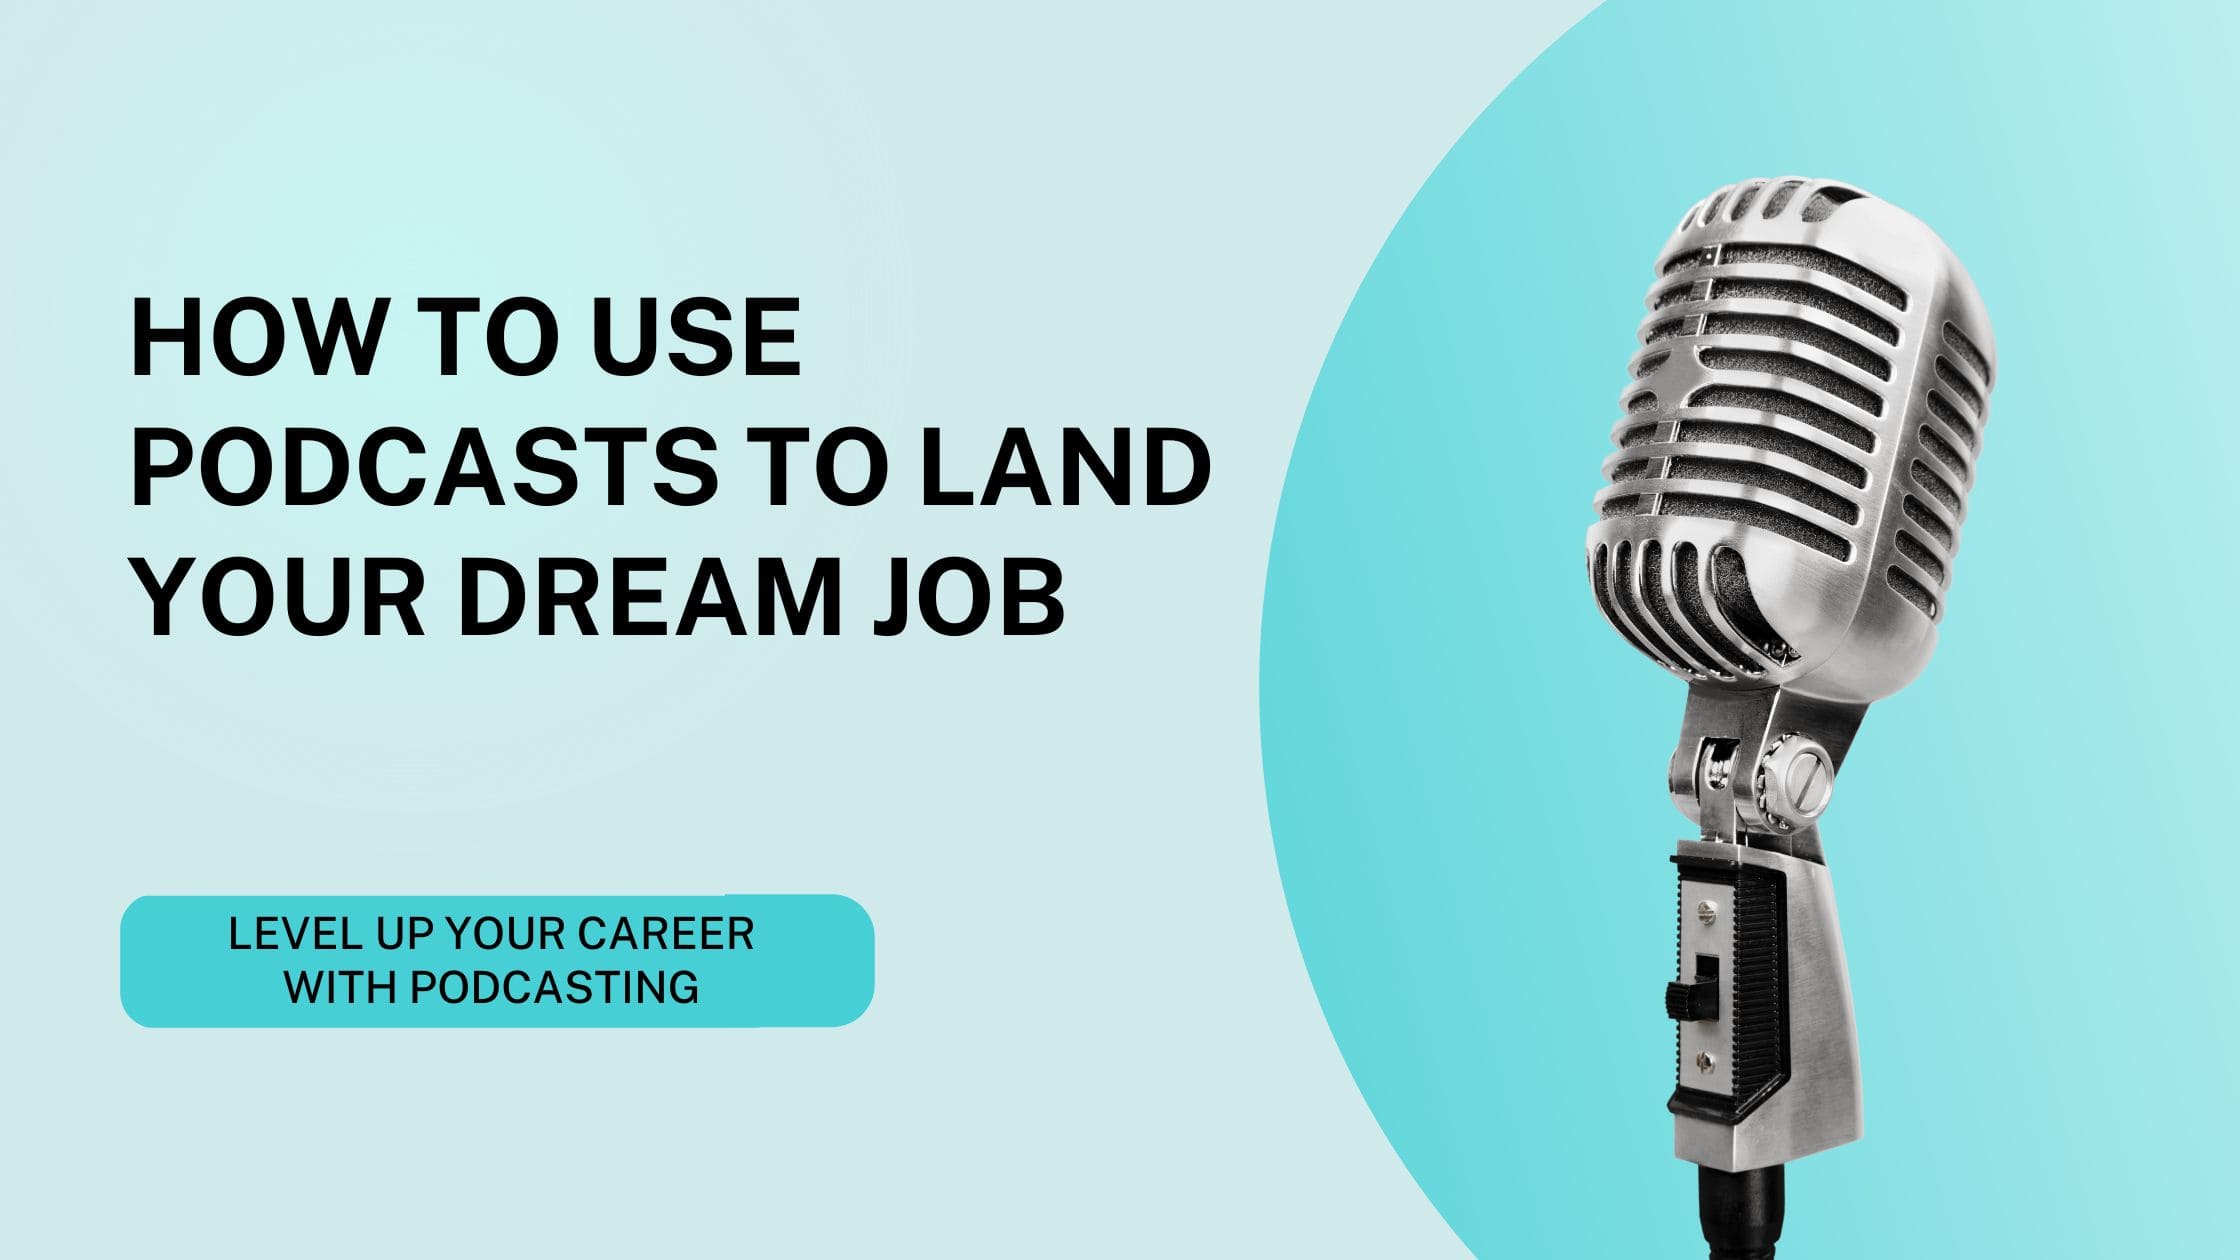 How to Use Podcasts to Land Your Dream Job Header